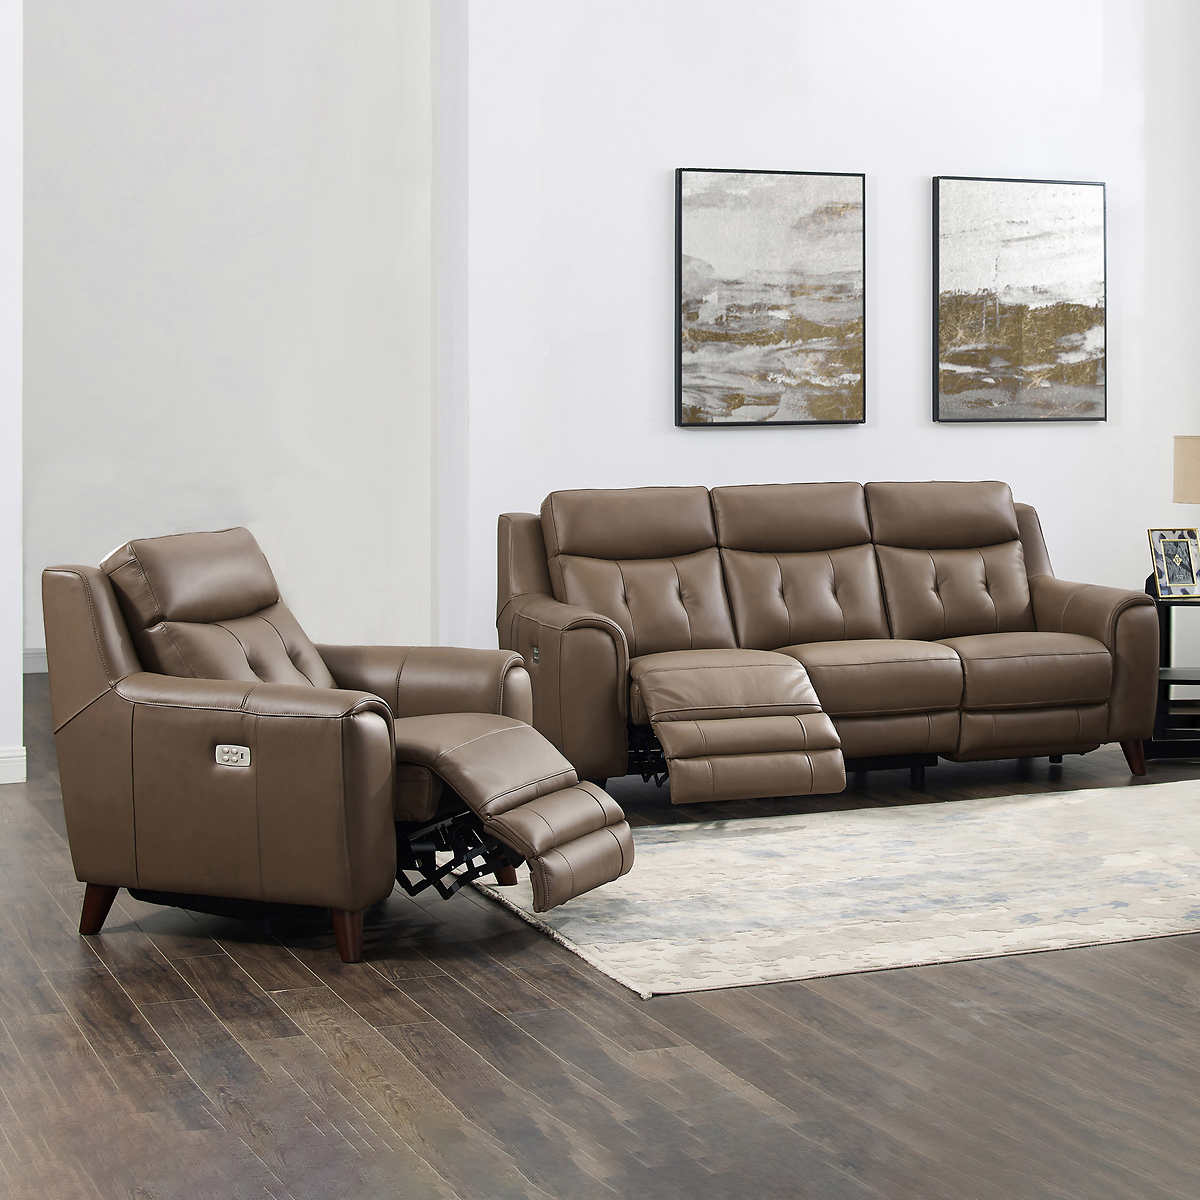 Campania Modern Top Grain Leather Dual, Capprio Top Grain Leather Power Reclining Sofa And Loveseat